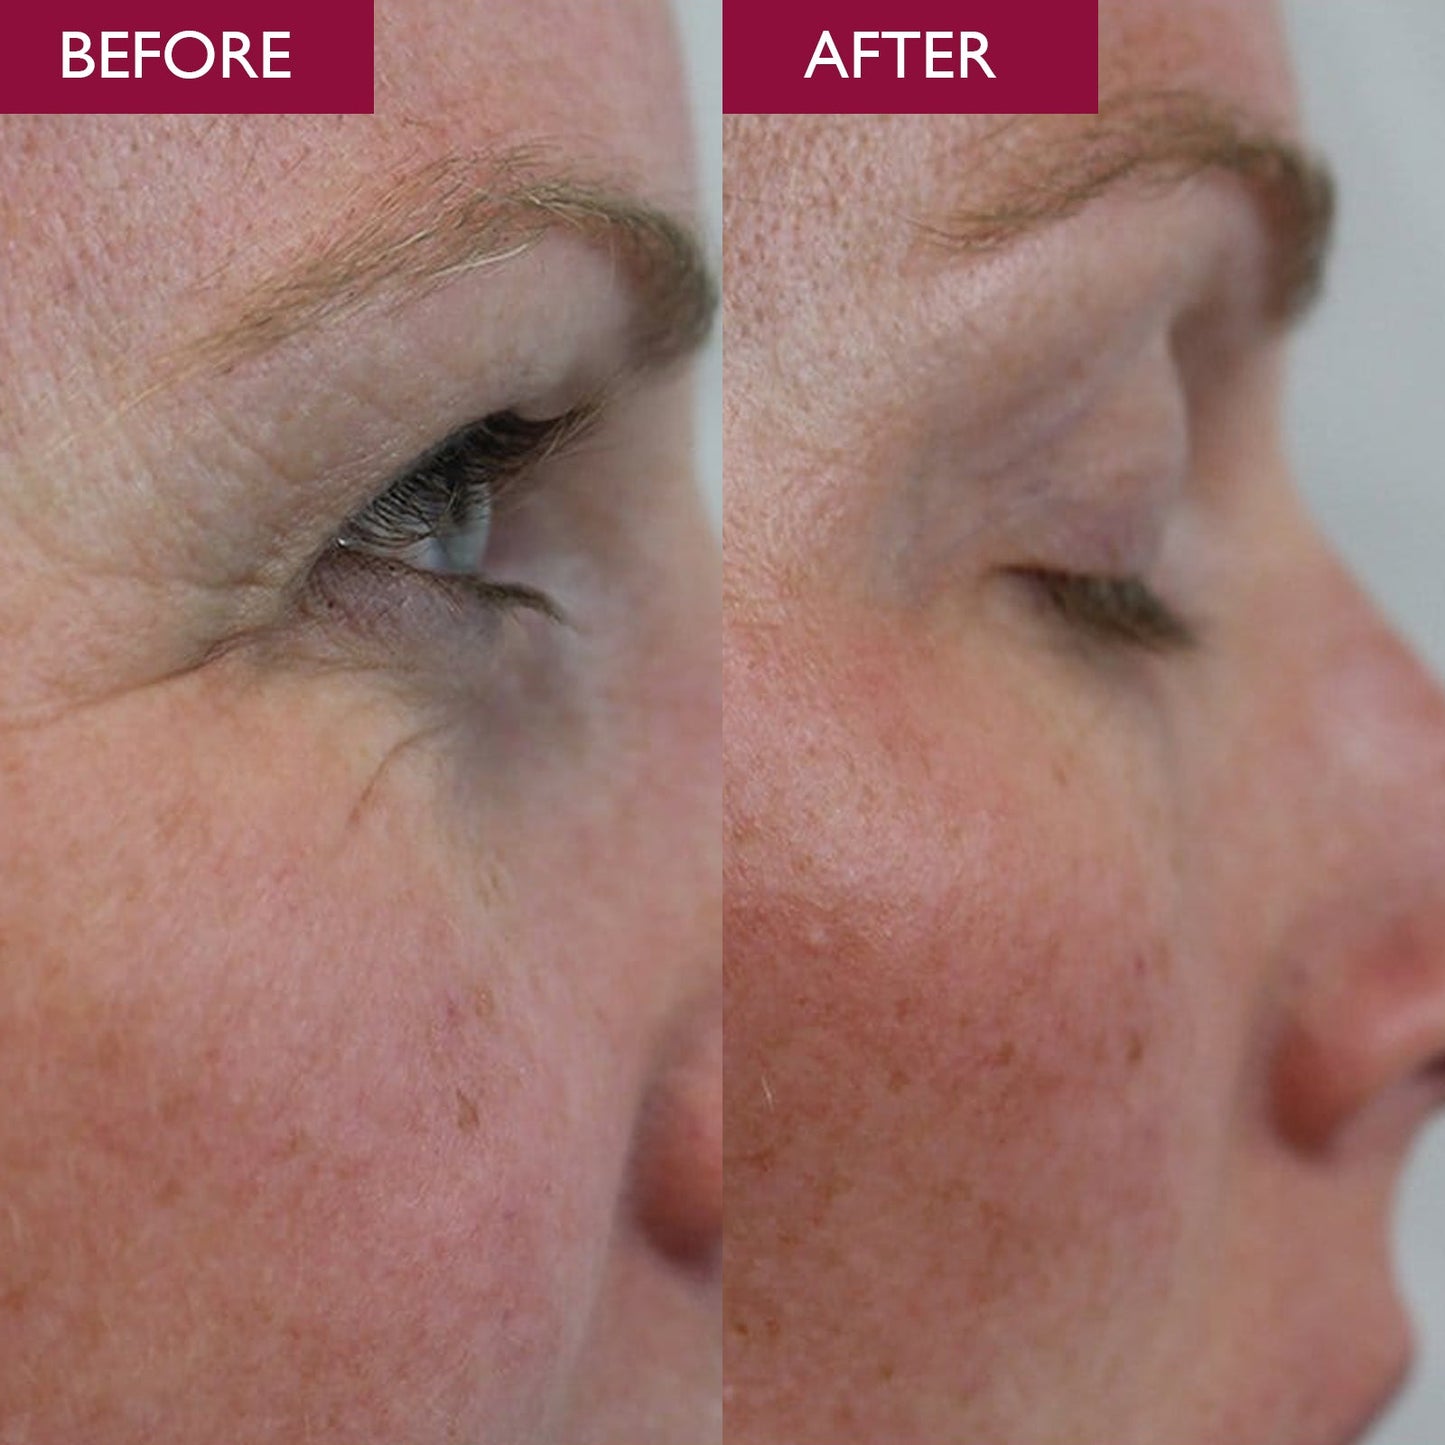 A before and after picture of a lady with wrinkles and darkness under the eye area.  After photo shows no wrinkles and a brighter under eye from using Skinician shea butter eye cream.